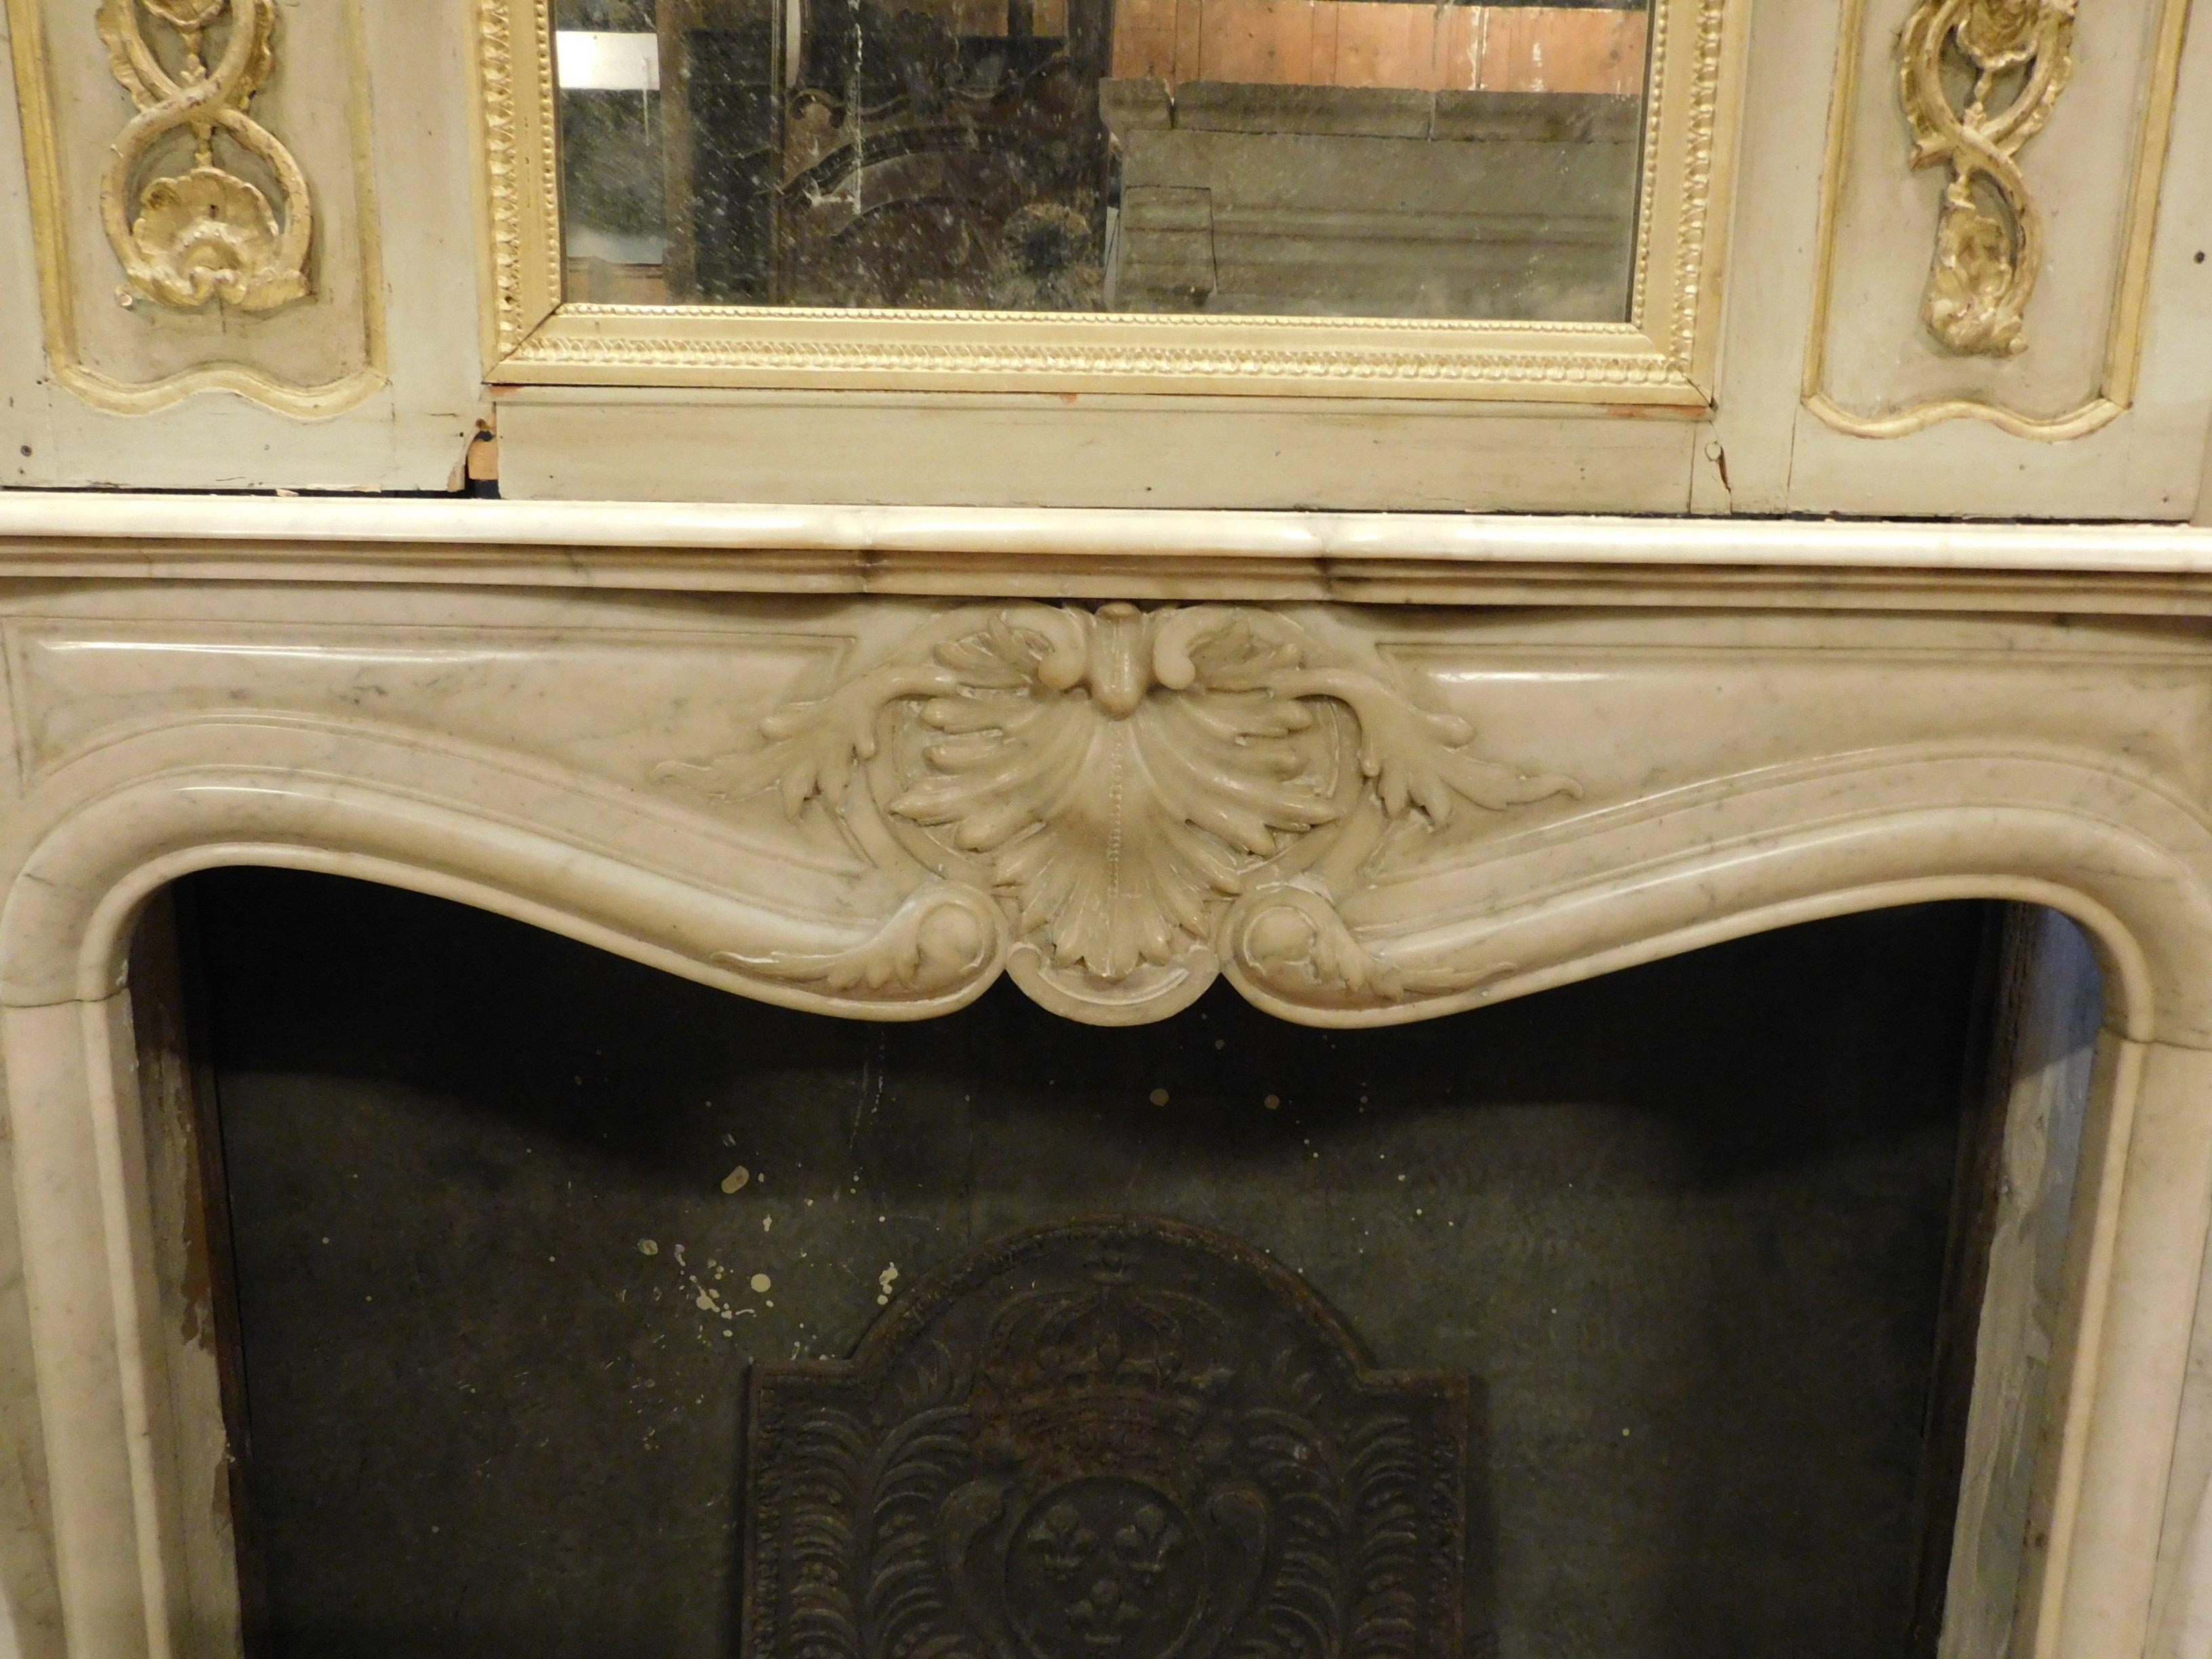 Hand-Carved Antique Fireplace in White Carrara Marble, Carved Shells, 1700, France